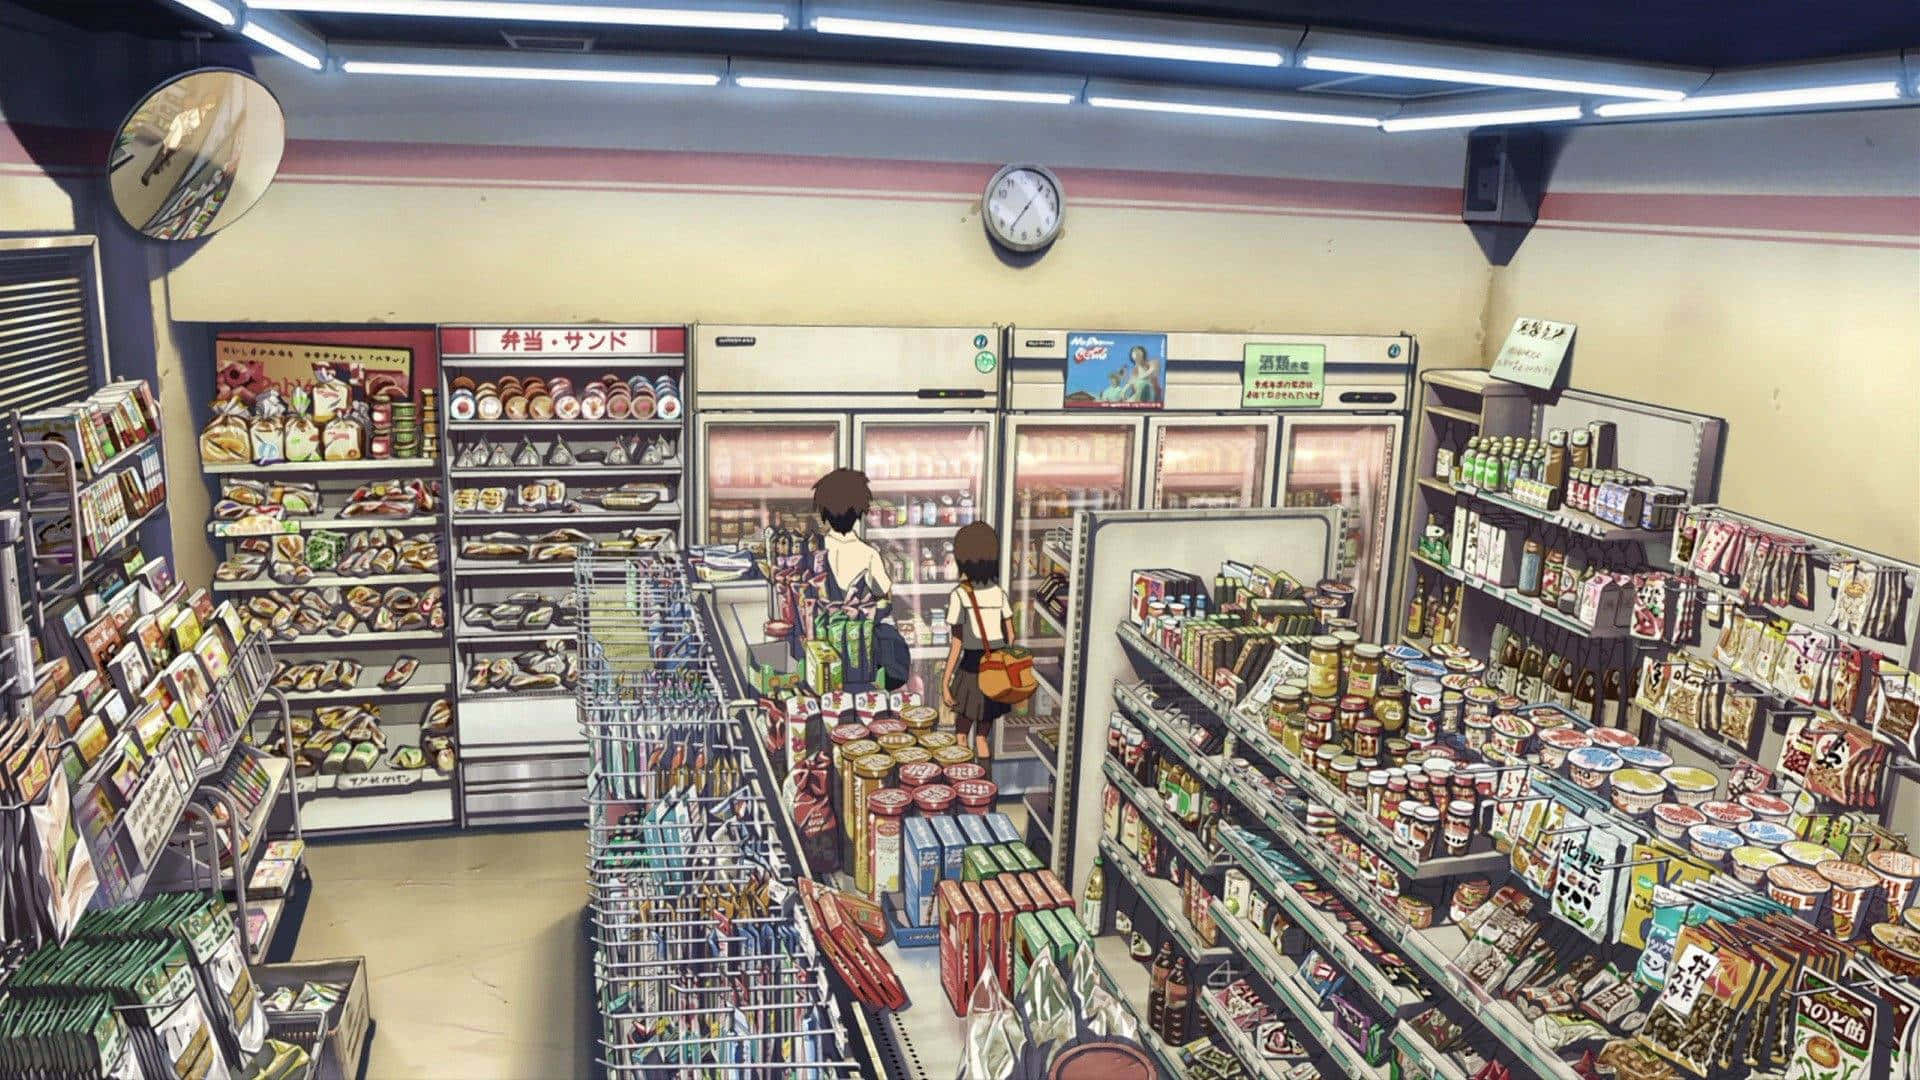 Fresh produce for all your grocery needs in one convenient store